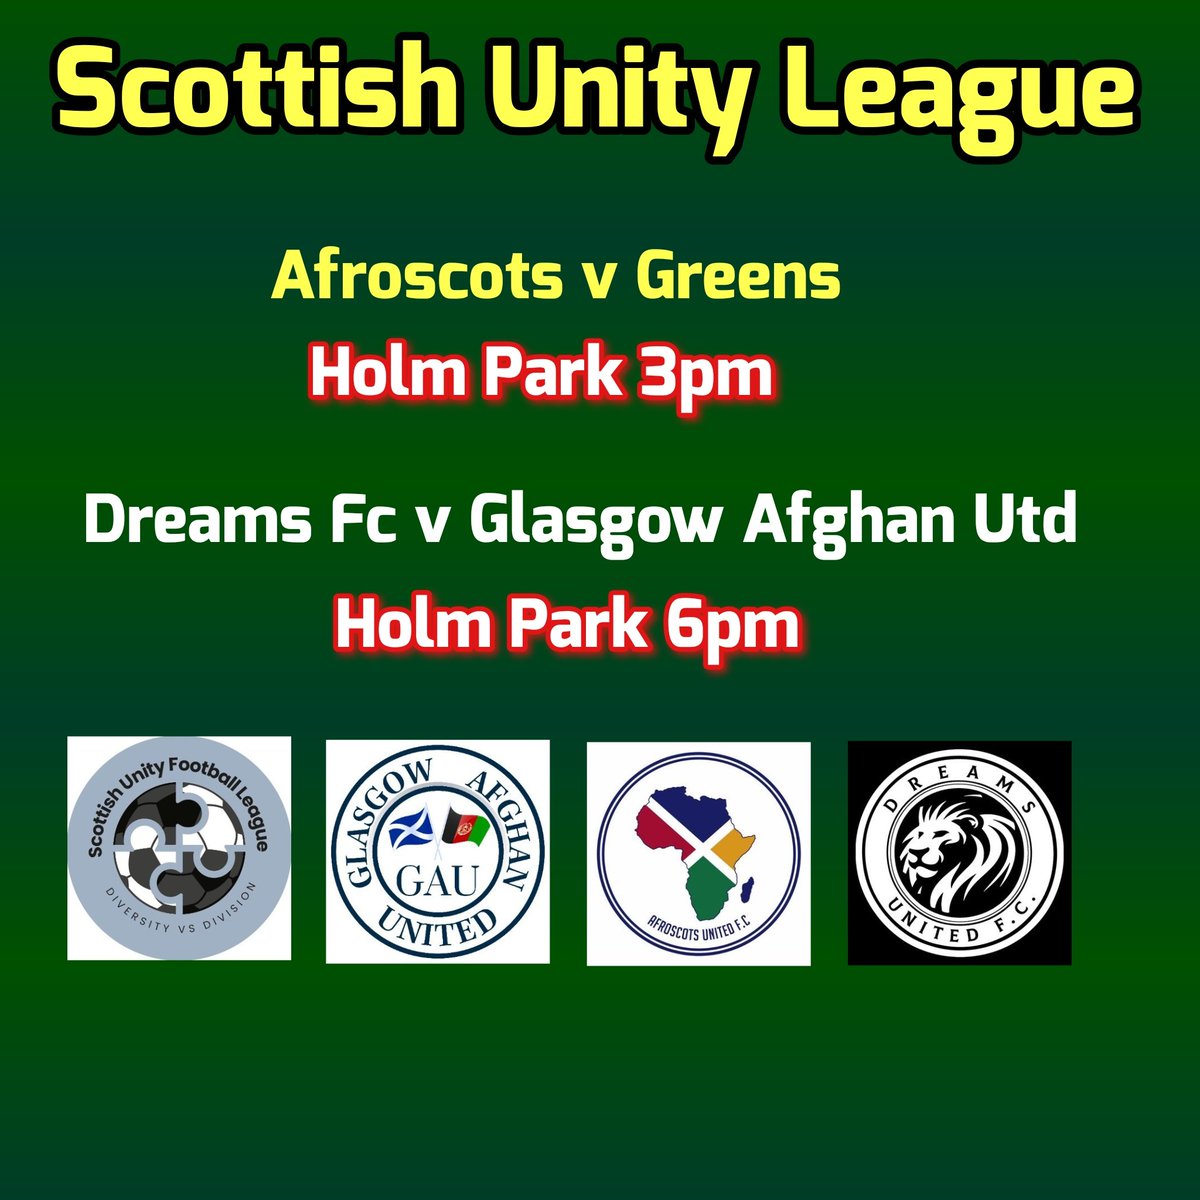 Games 237 & 238 this afternoon in @ScottishUnityFL . Game 21 & 22 for Unity League teams.